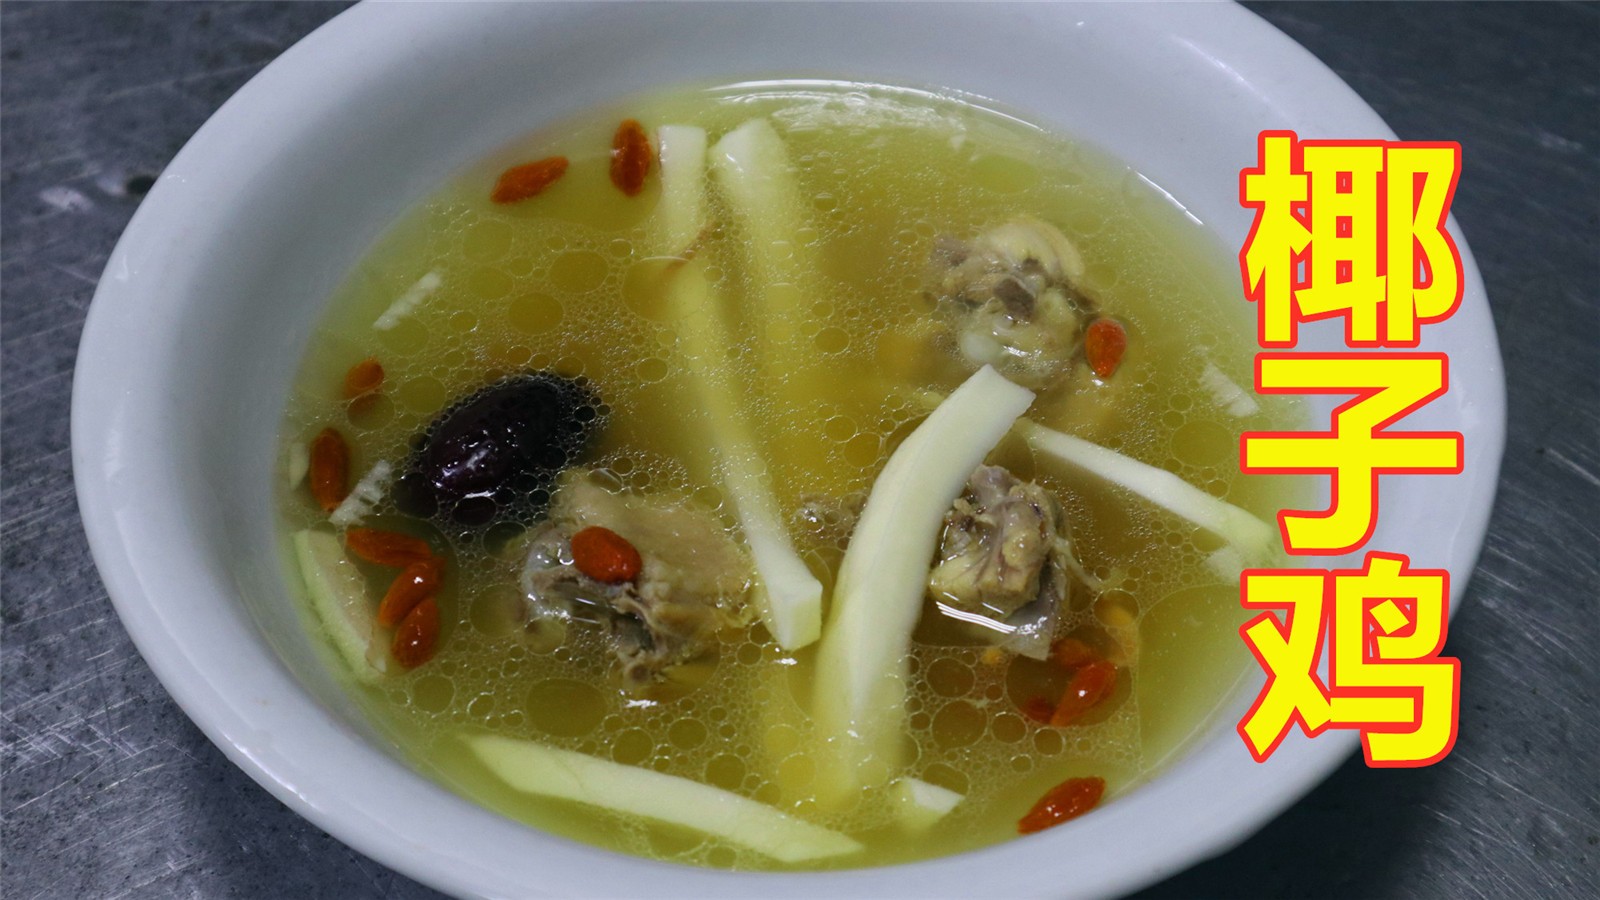 I don't know what soup to drink on Mid-Autumn Festival. Try this coconut chicken! Sweet fragrance, don't you learn?